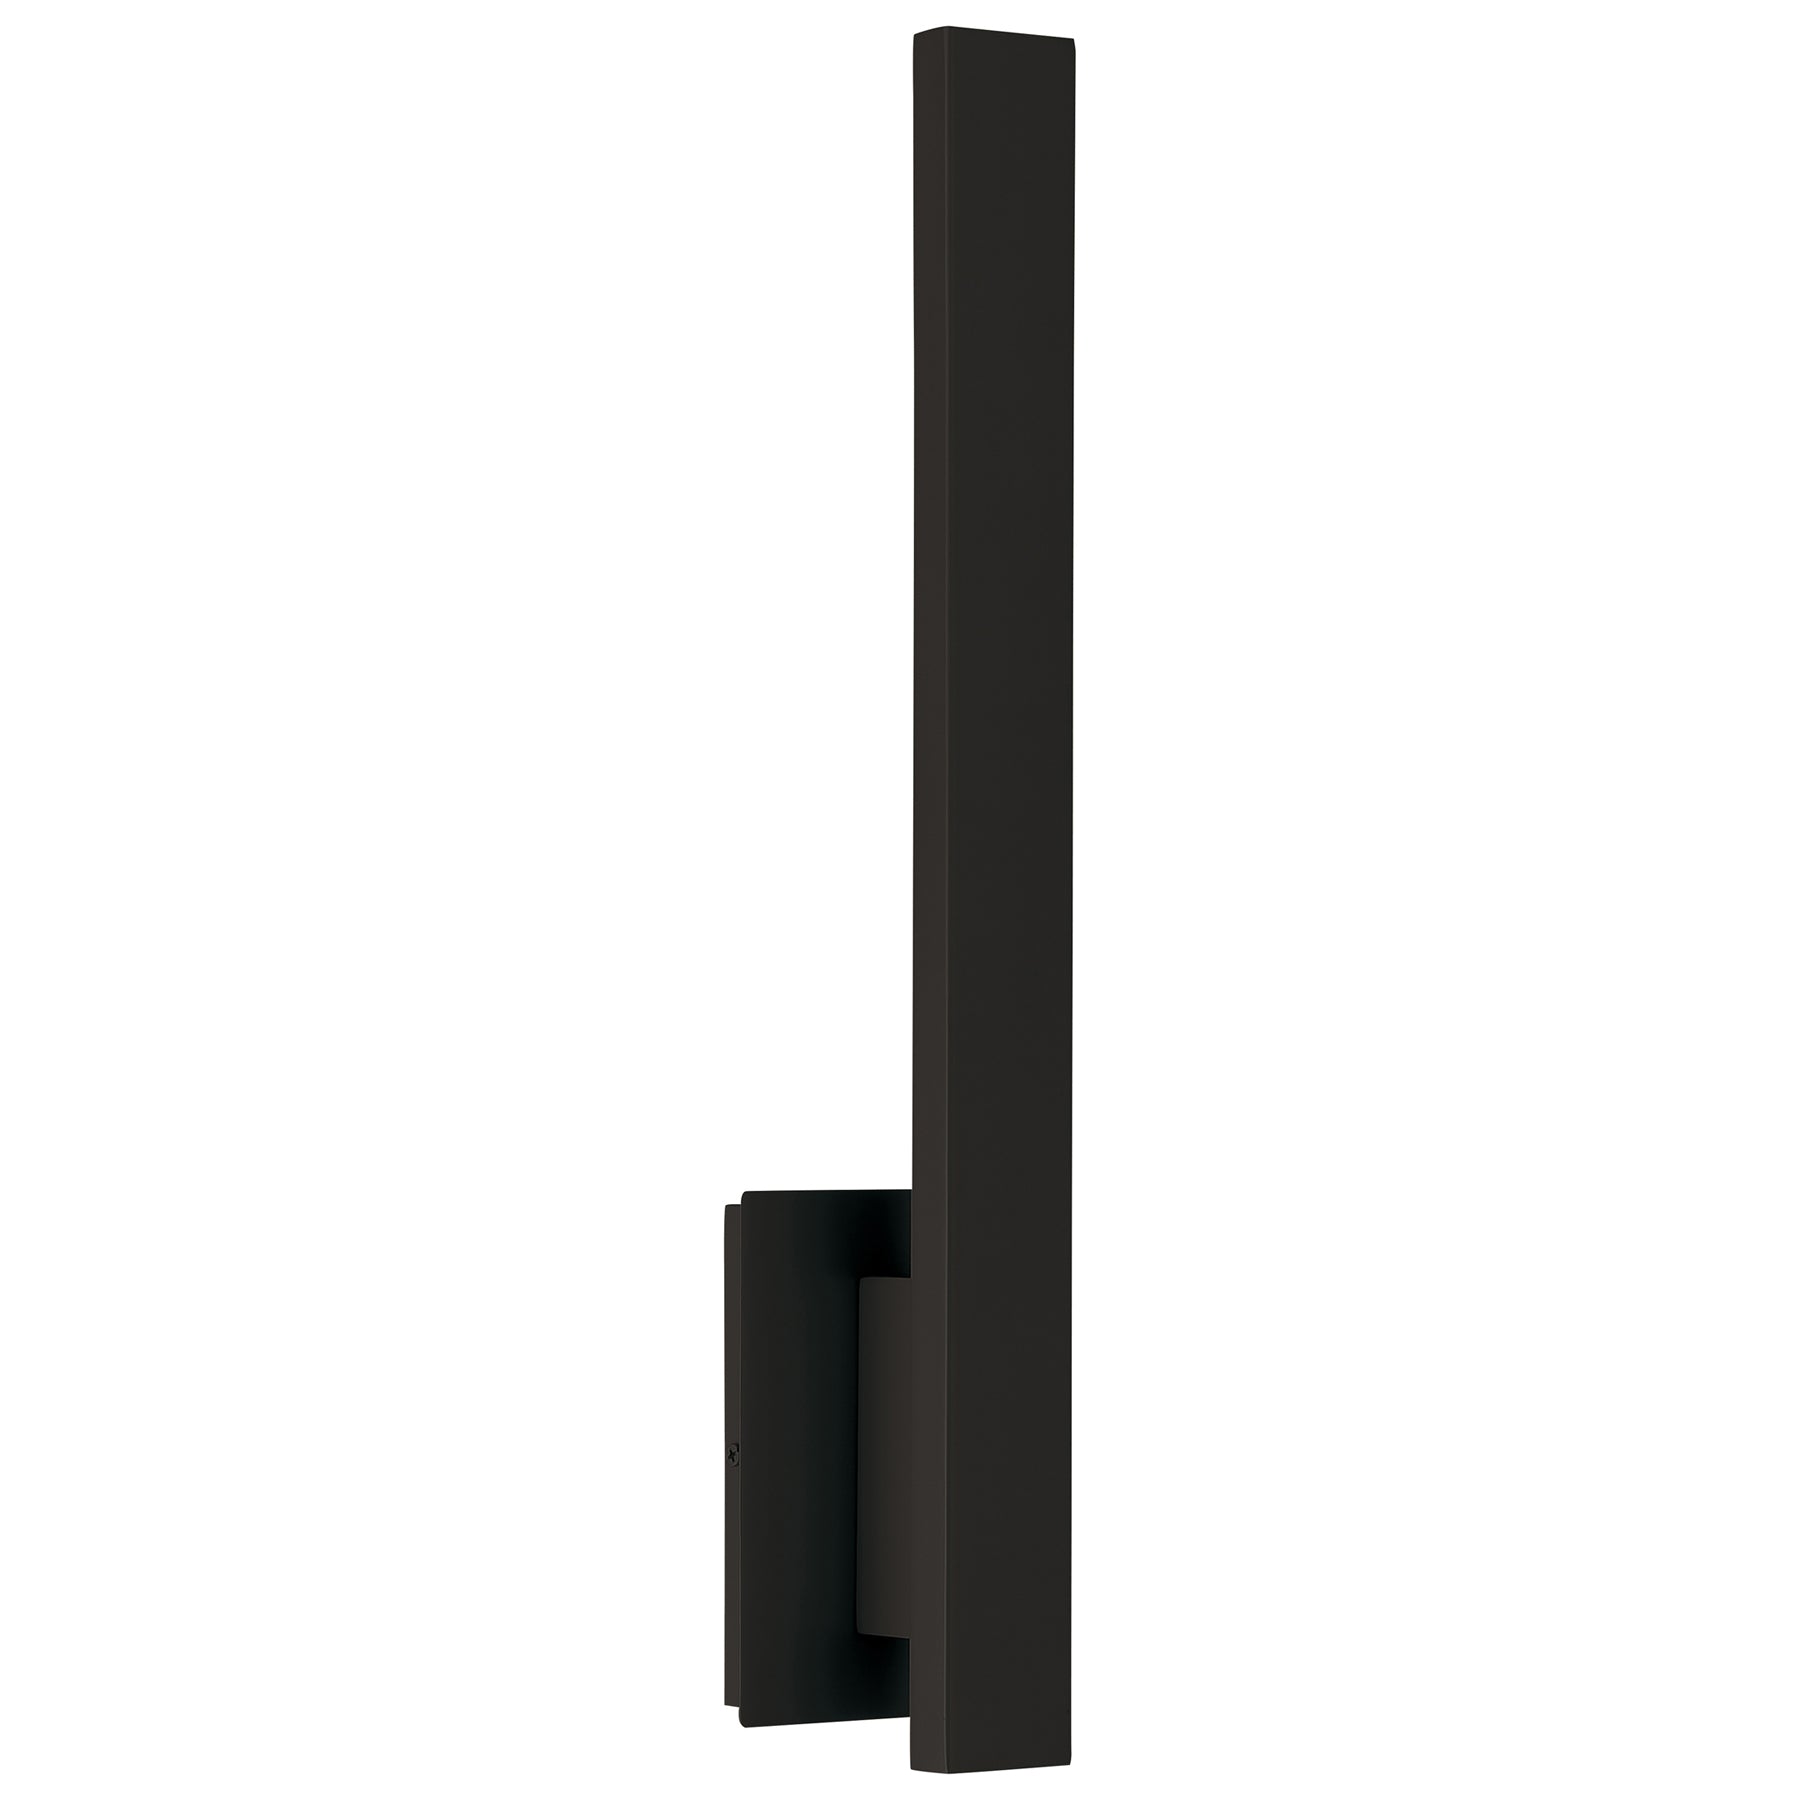 Haus 1 Light 5in. Wall Sconce (Matte Black)